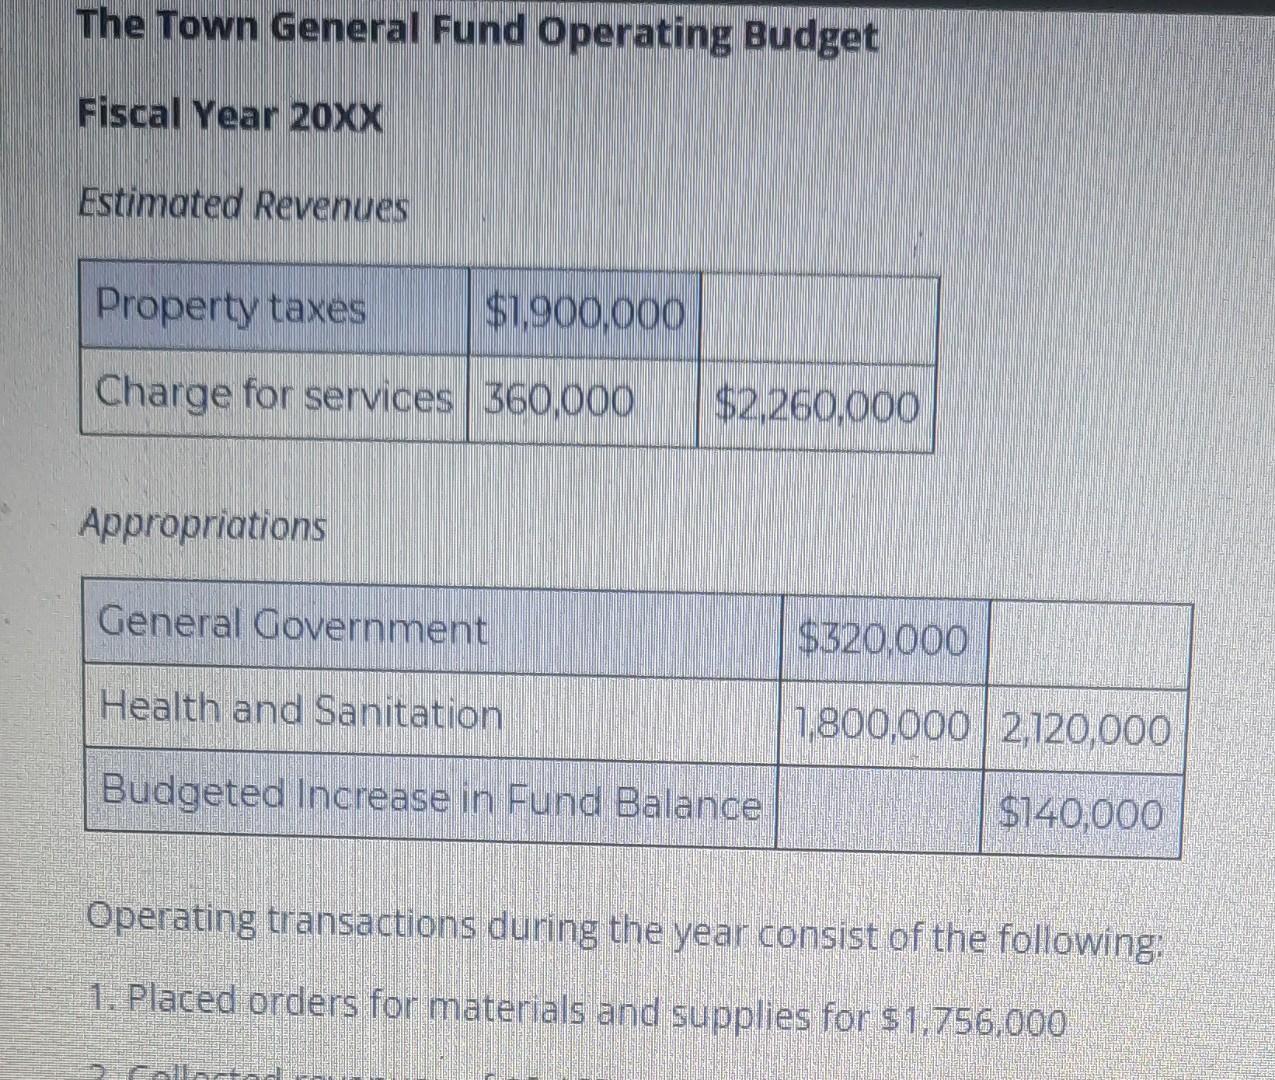 The Town General Fund Operating BudgetFiscal Year 20xxEstimated RevenuesProperty taxes$1.900.000Charge for services 360.